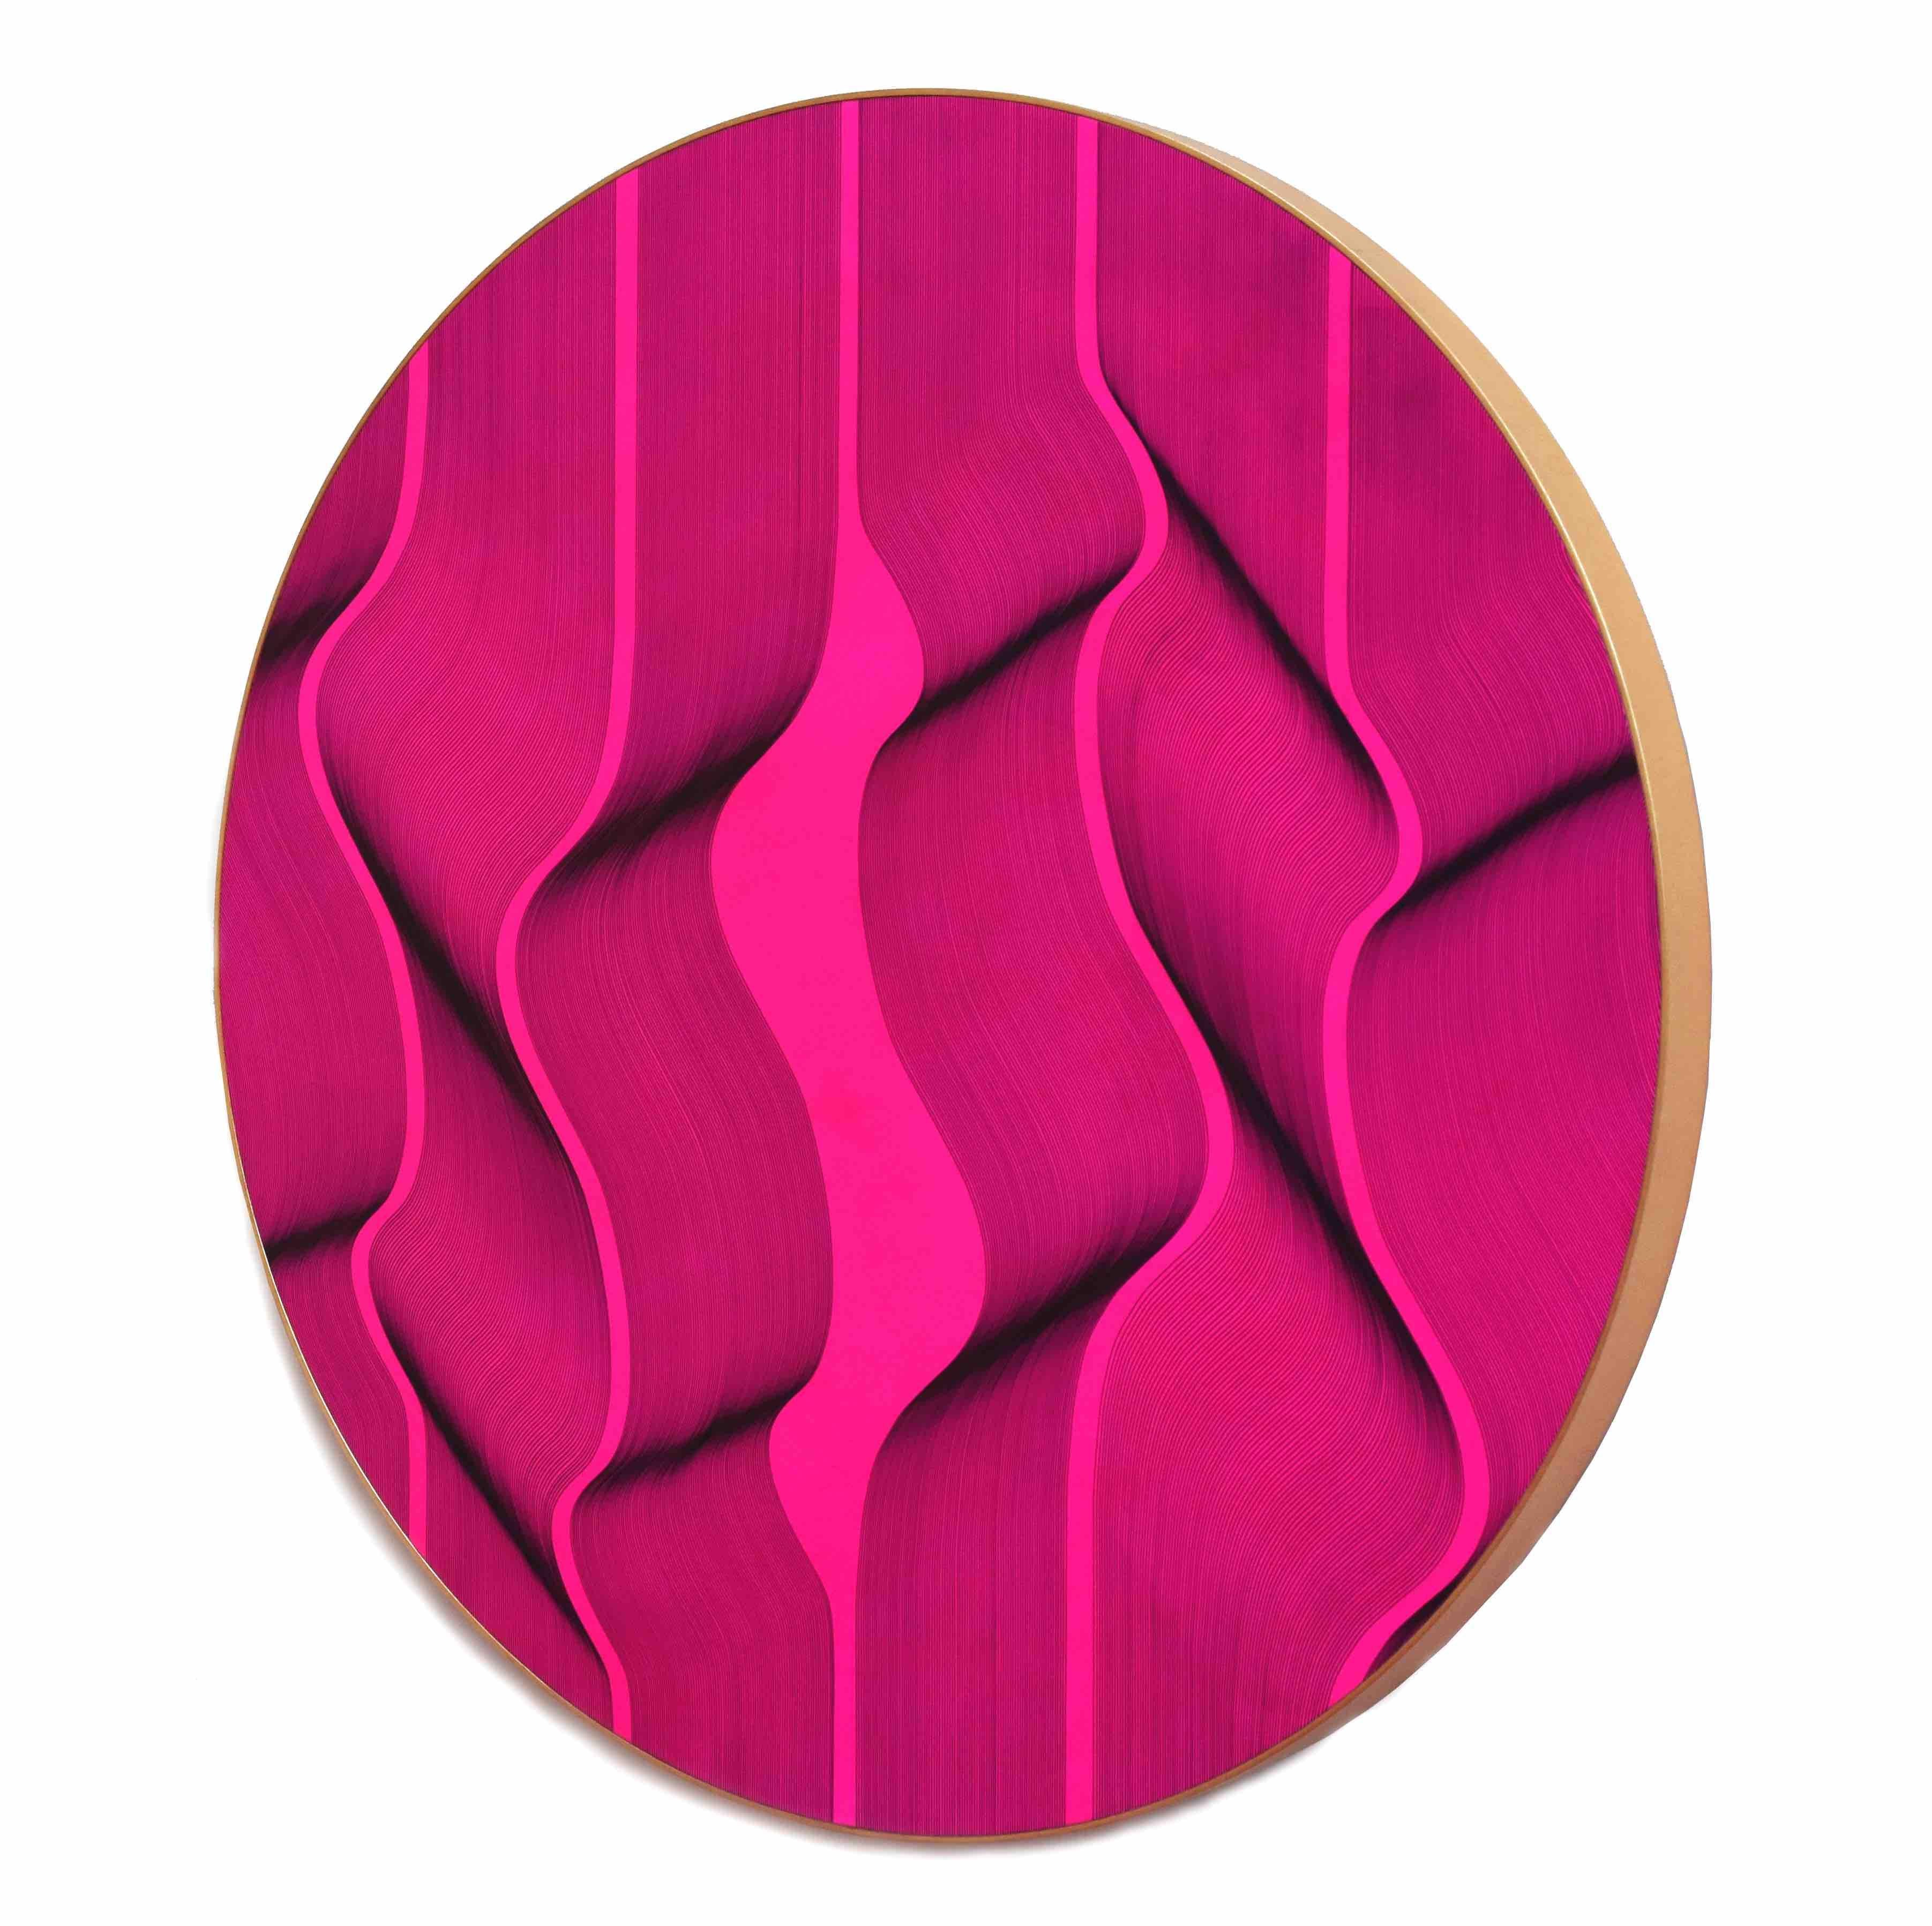 Fluo pink surface - geometric abstract painting